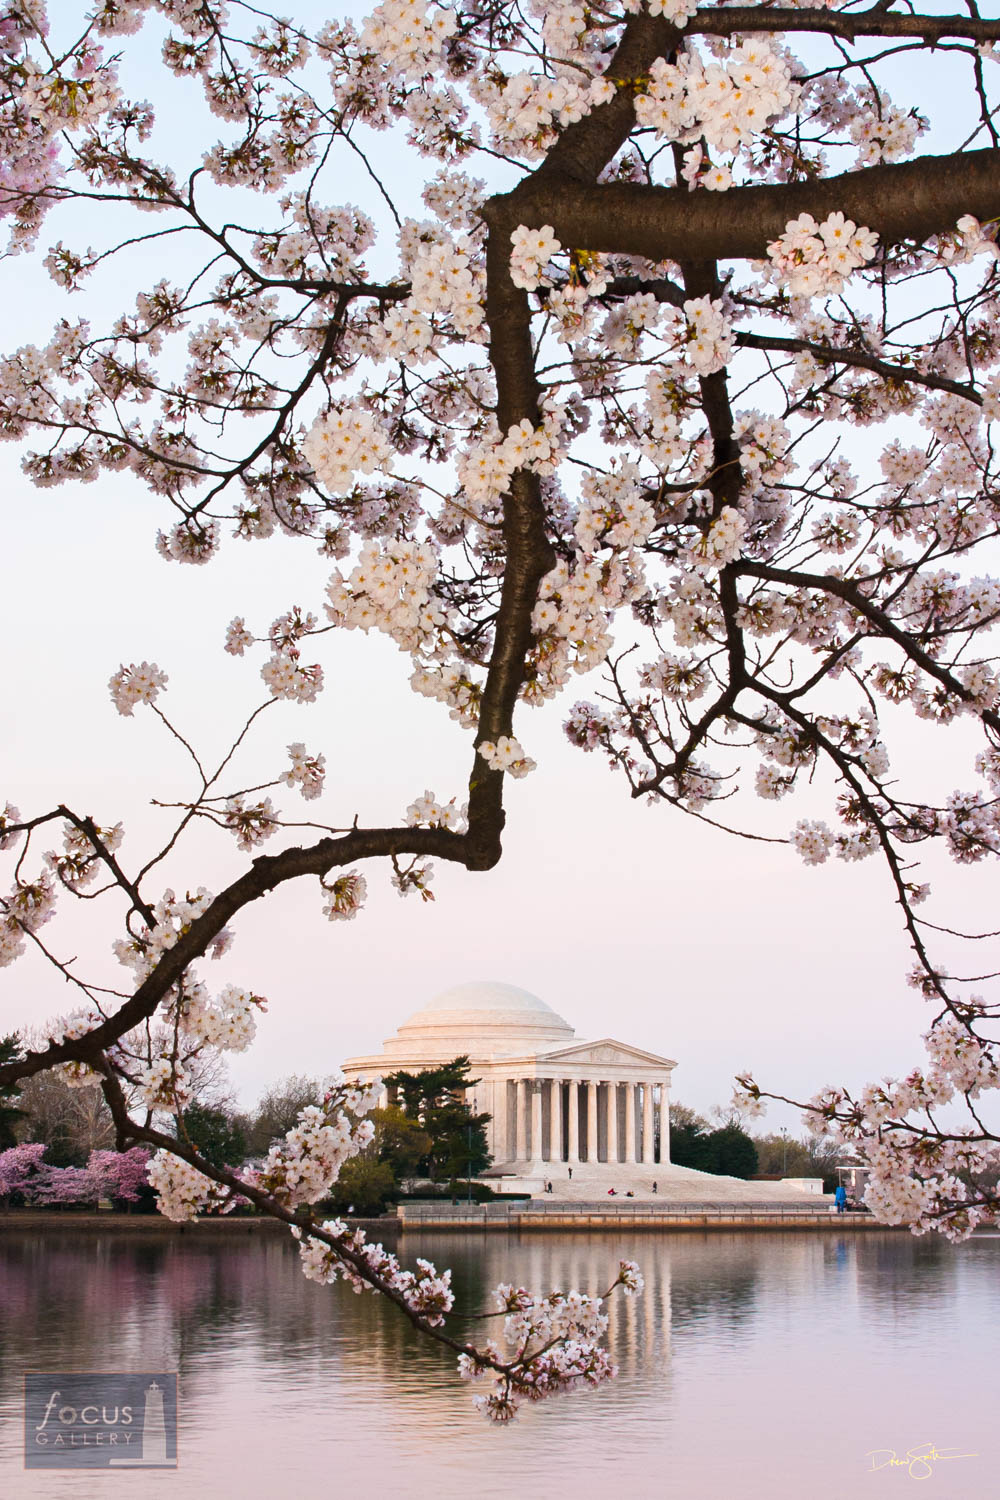 Photo © Drew Smith The Jefferson Memorial framed by Cherry Blossoms